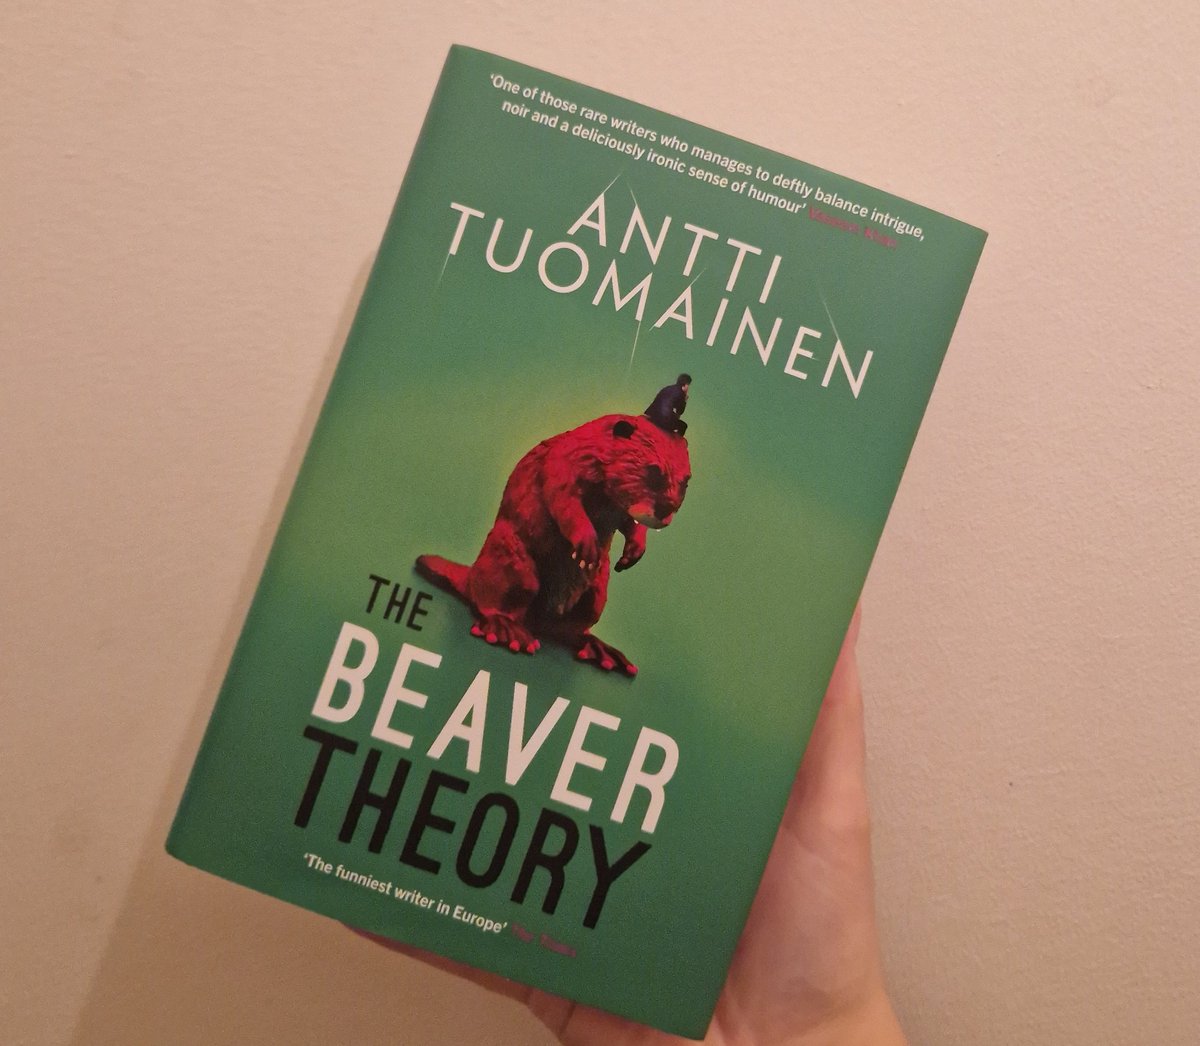 ✨️GIVEAWAY✨️

Thanks @OrendaBooks I have a copy of The Beaver theory to giveaway!

To enter simply:
Like
Follow
Retweet 

UK only, winner announced Monday 22nd Jan 🙌🏻

#booktwt #BookGiveaway #TheBeaverTheory